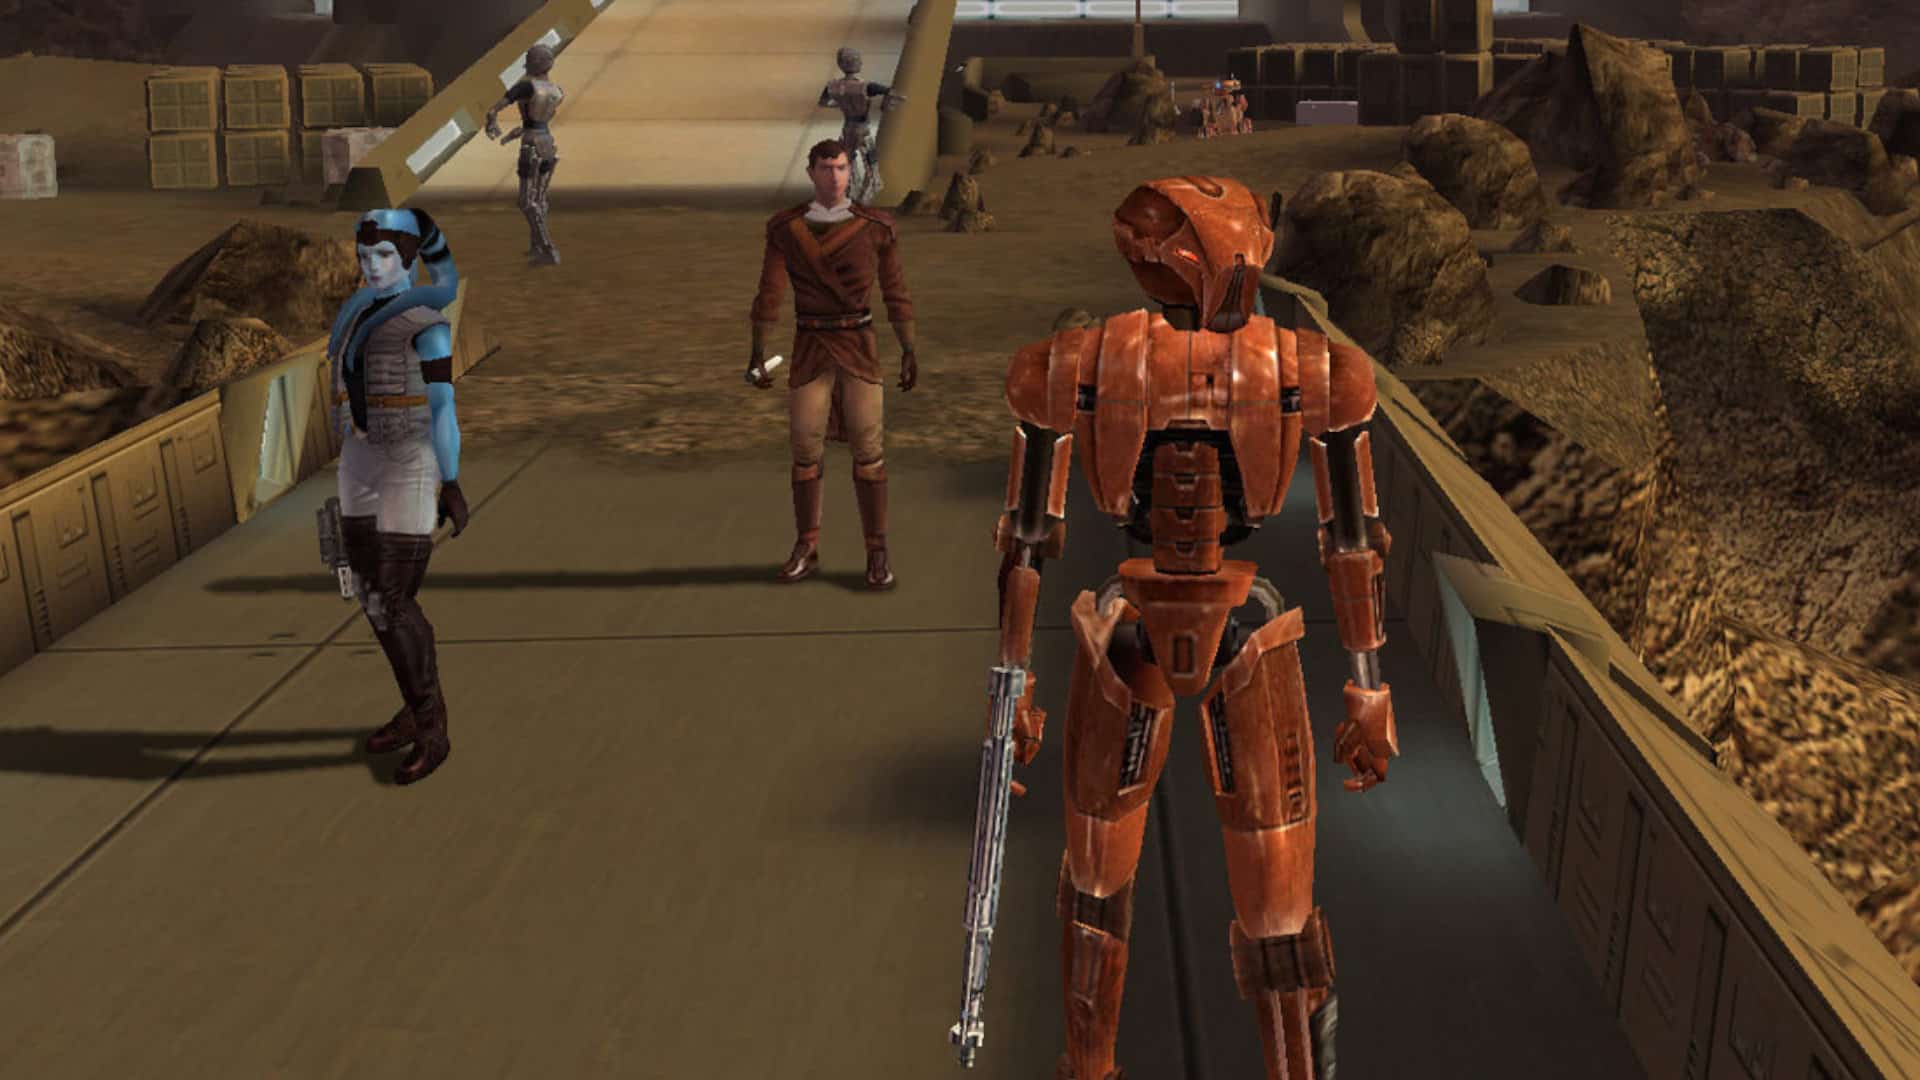 Microsoft Allegedly Turned Down KOTOR Remake According to Rumors